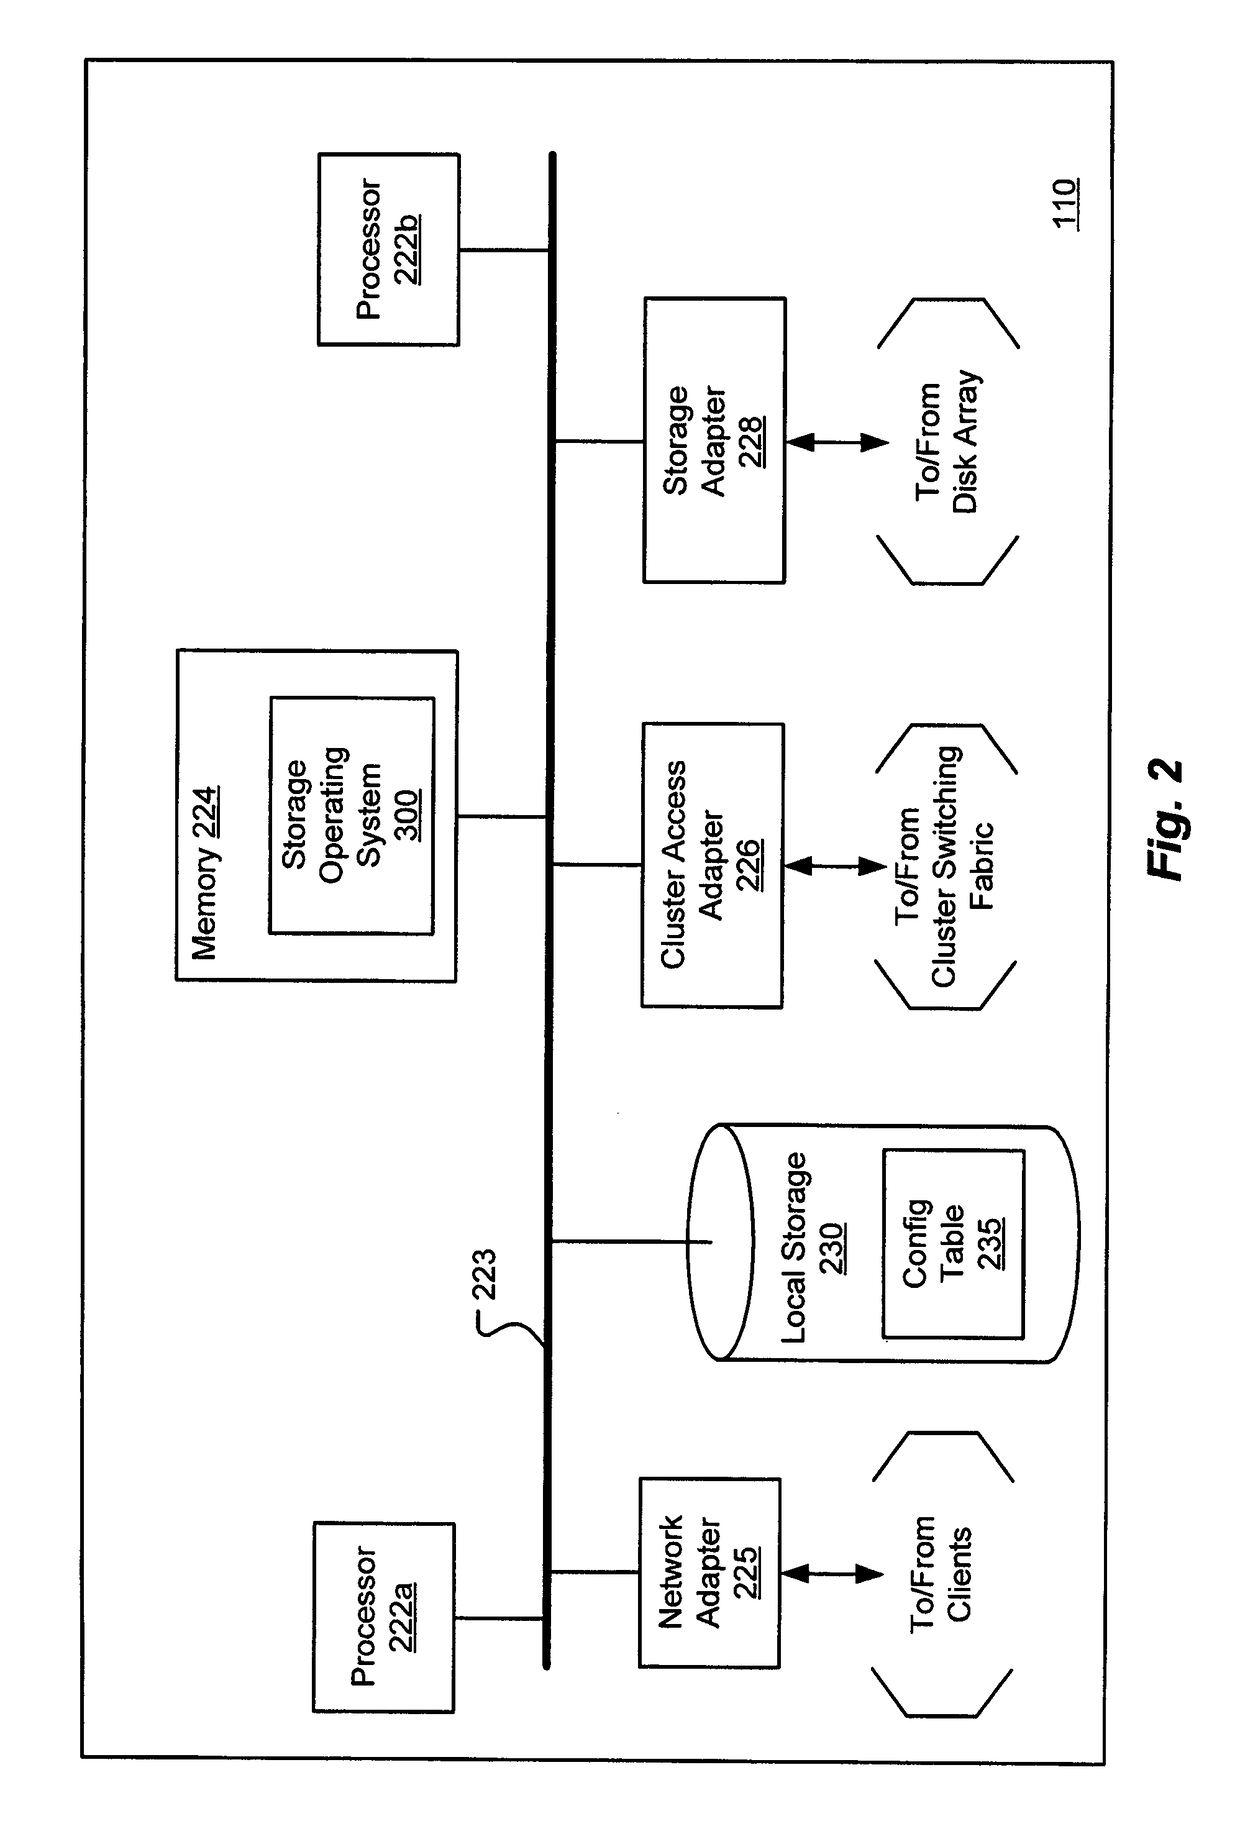 Customized data generating data storage system filter for data security